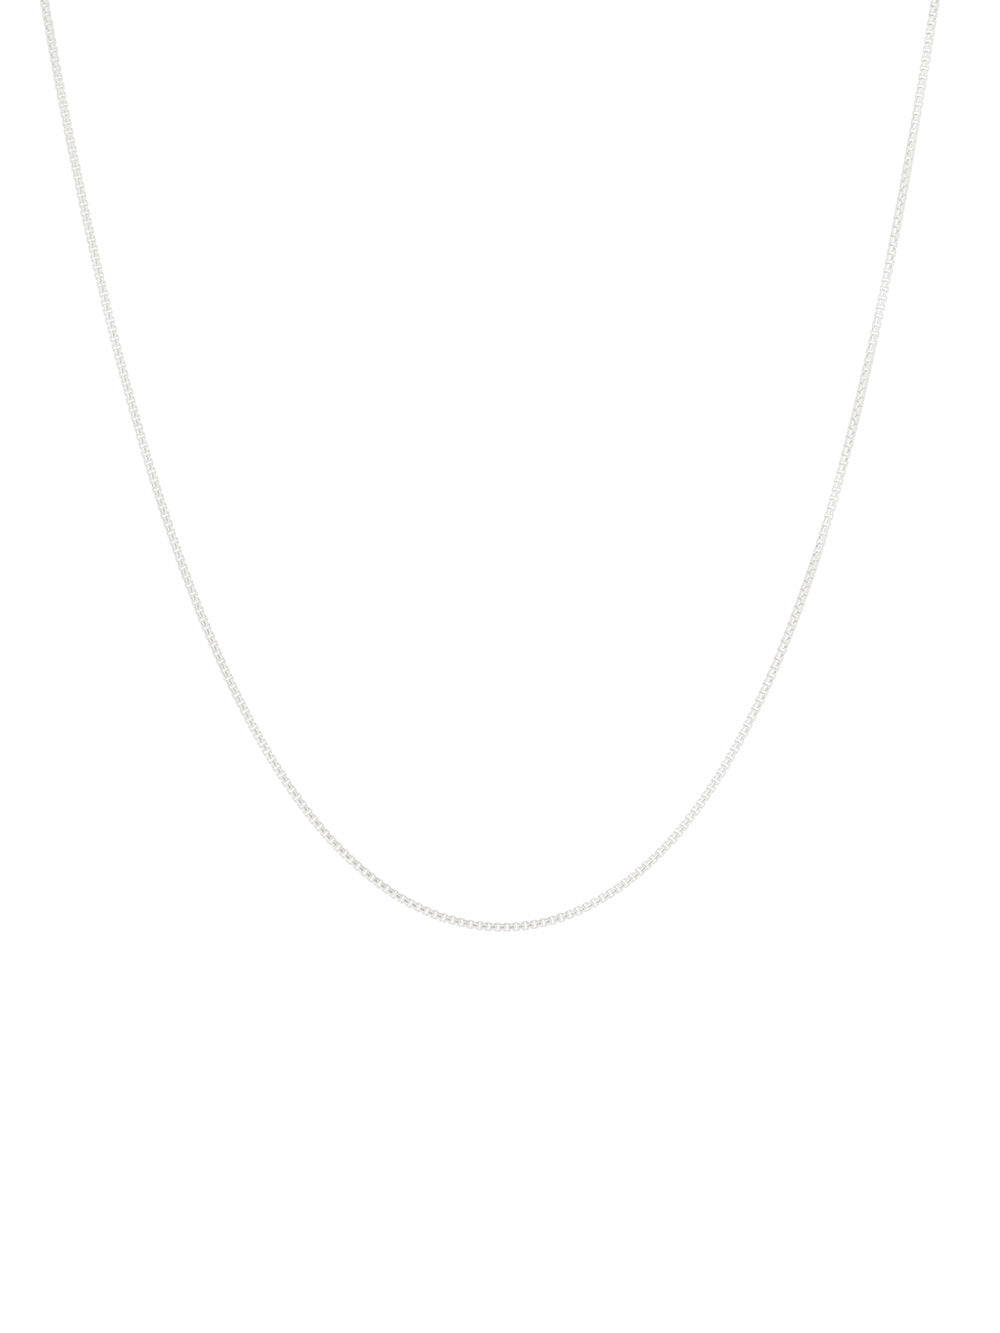 EVERYWHERE necklace⎜Silver